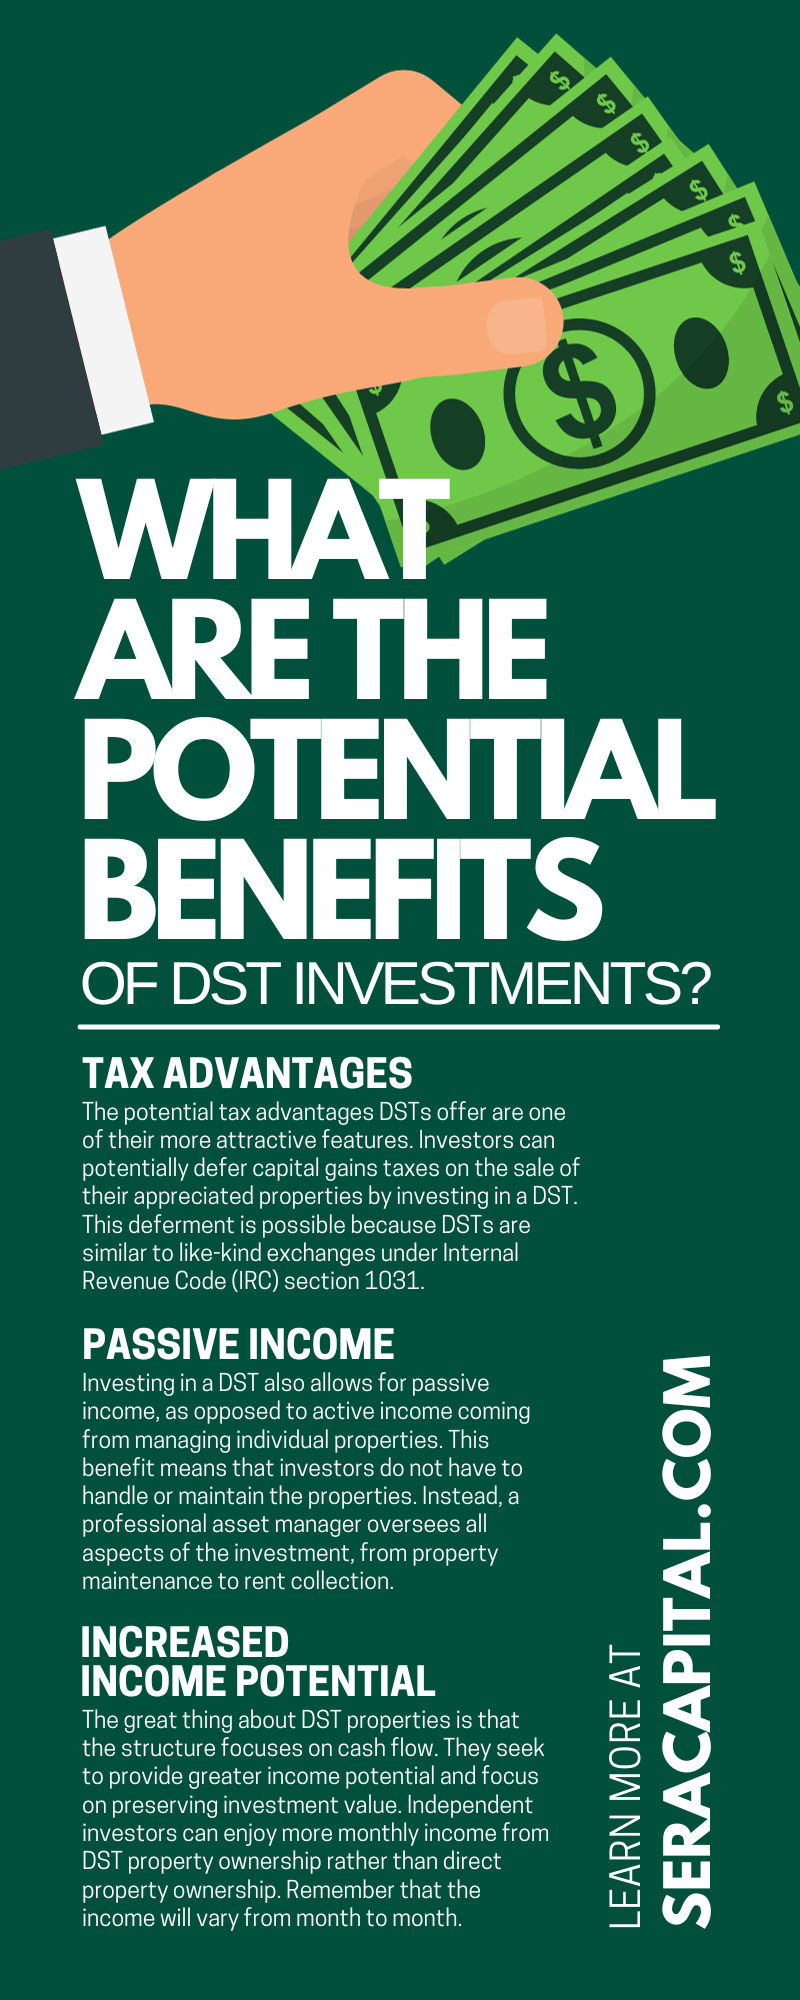 What Are the Potential Benefits of DST Investments?